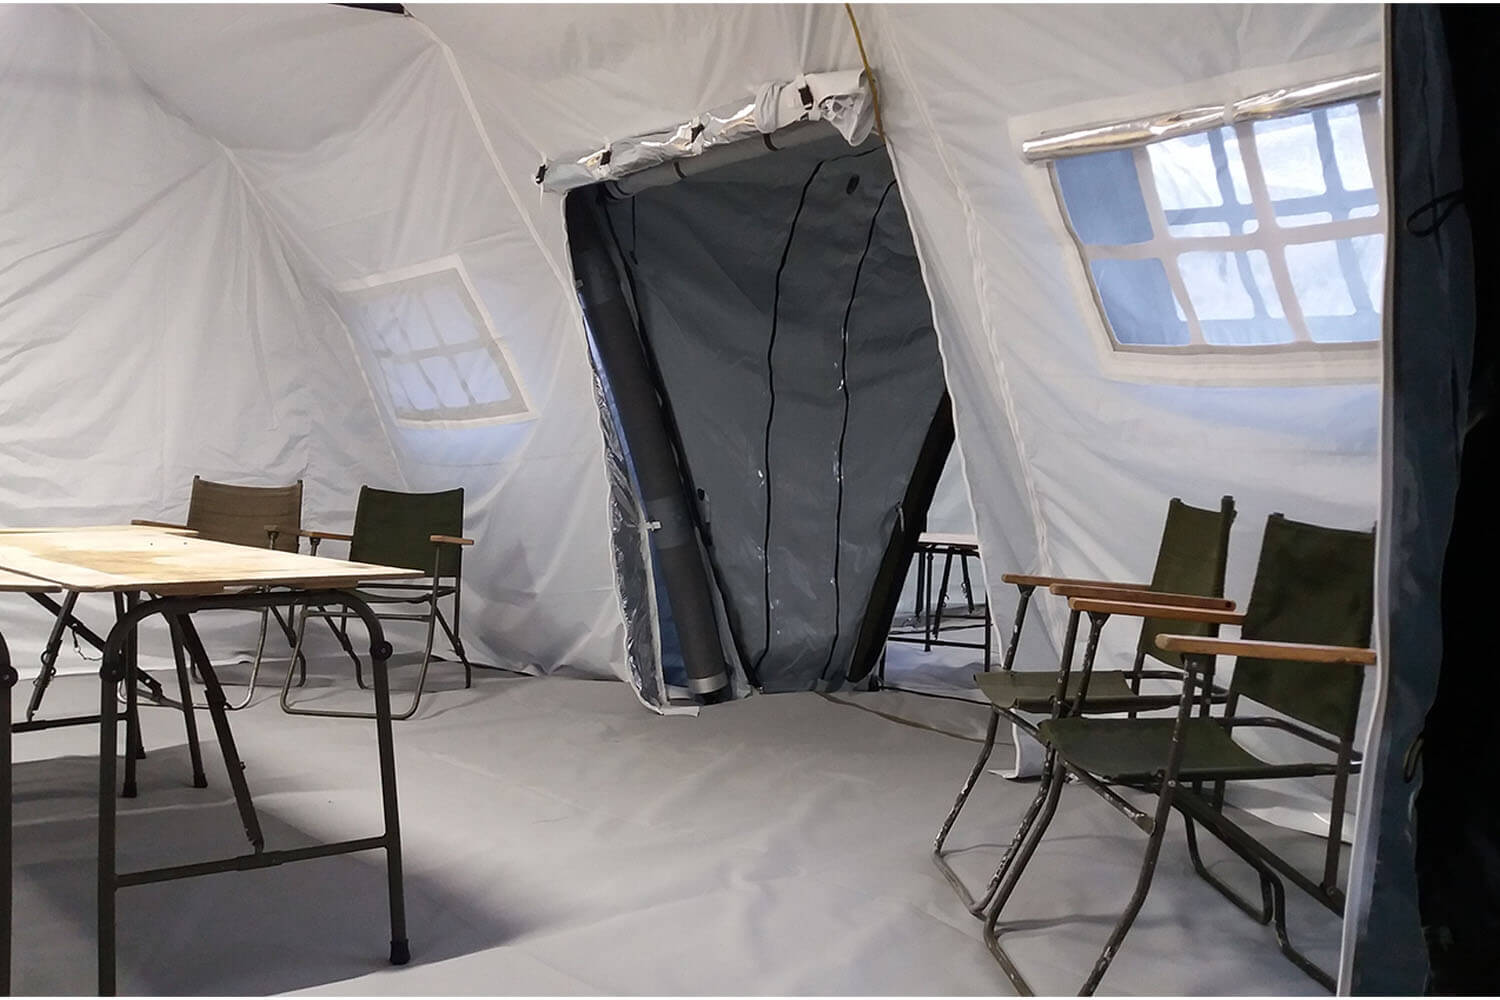 Interior of the heavy duty inflatable military tent Nixus PRO